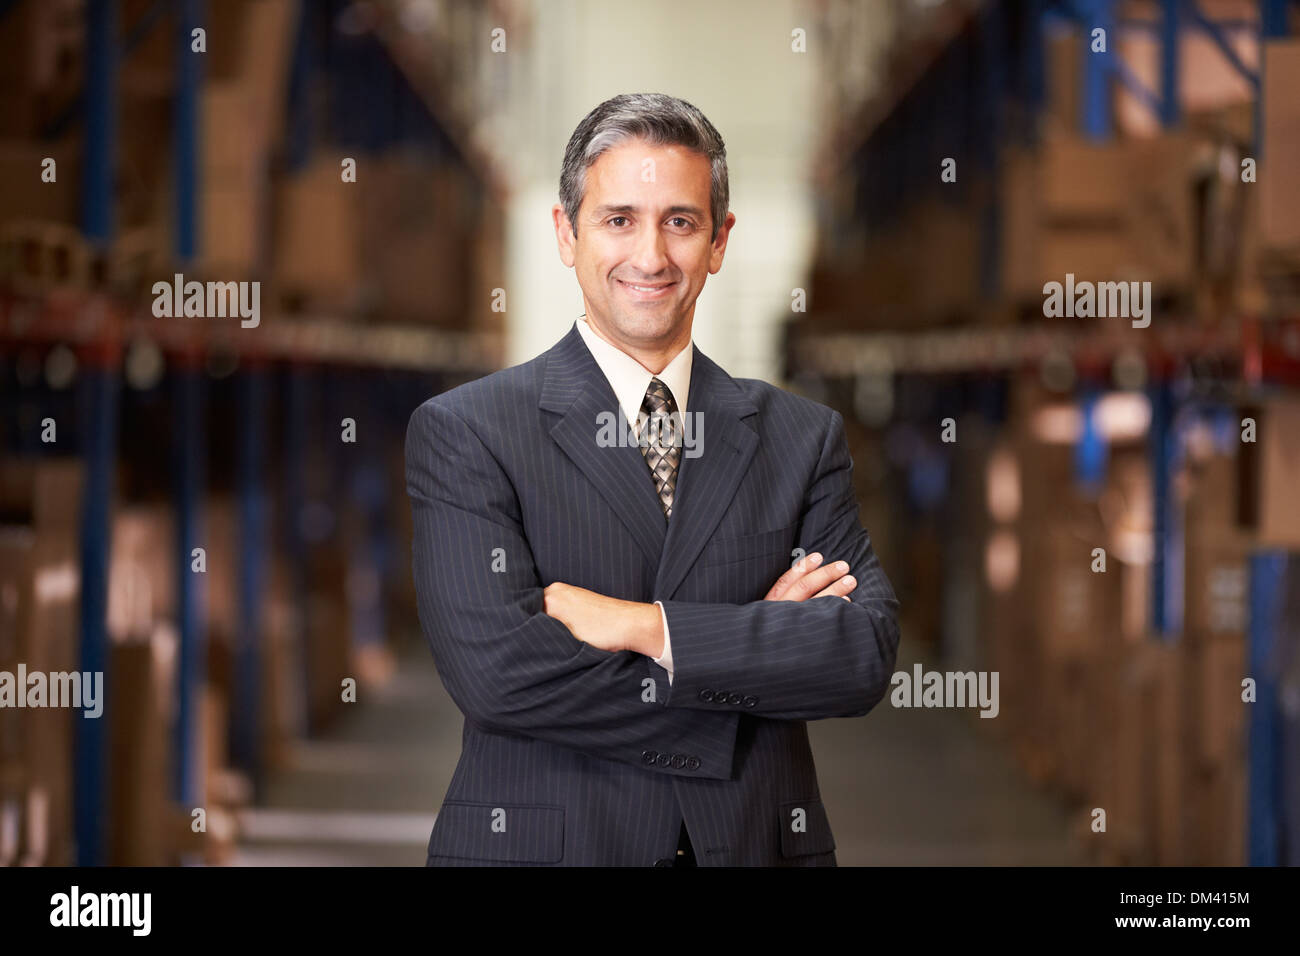 Portrait Of Manager In Warehouse Stock Photo